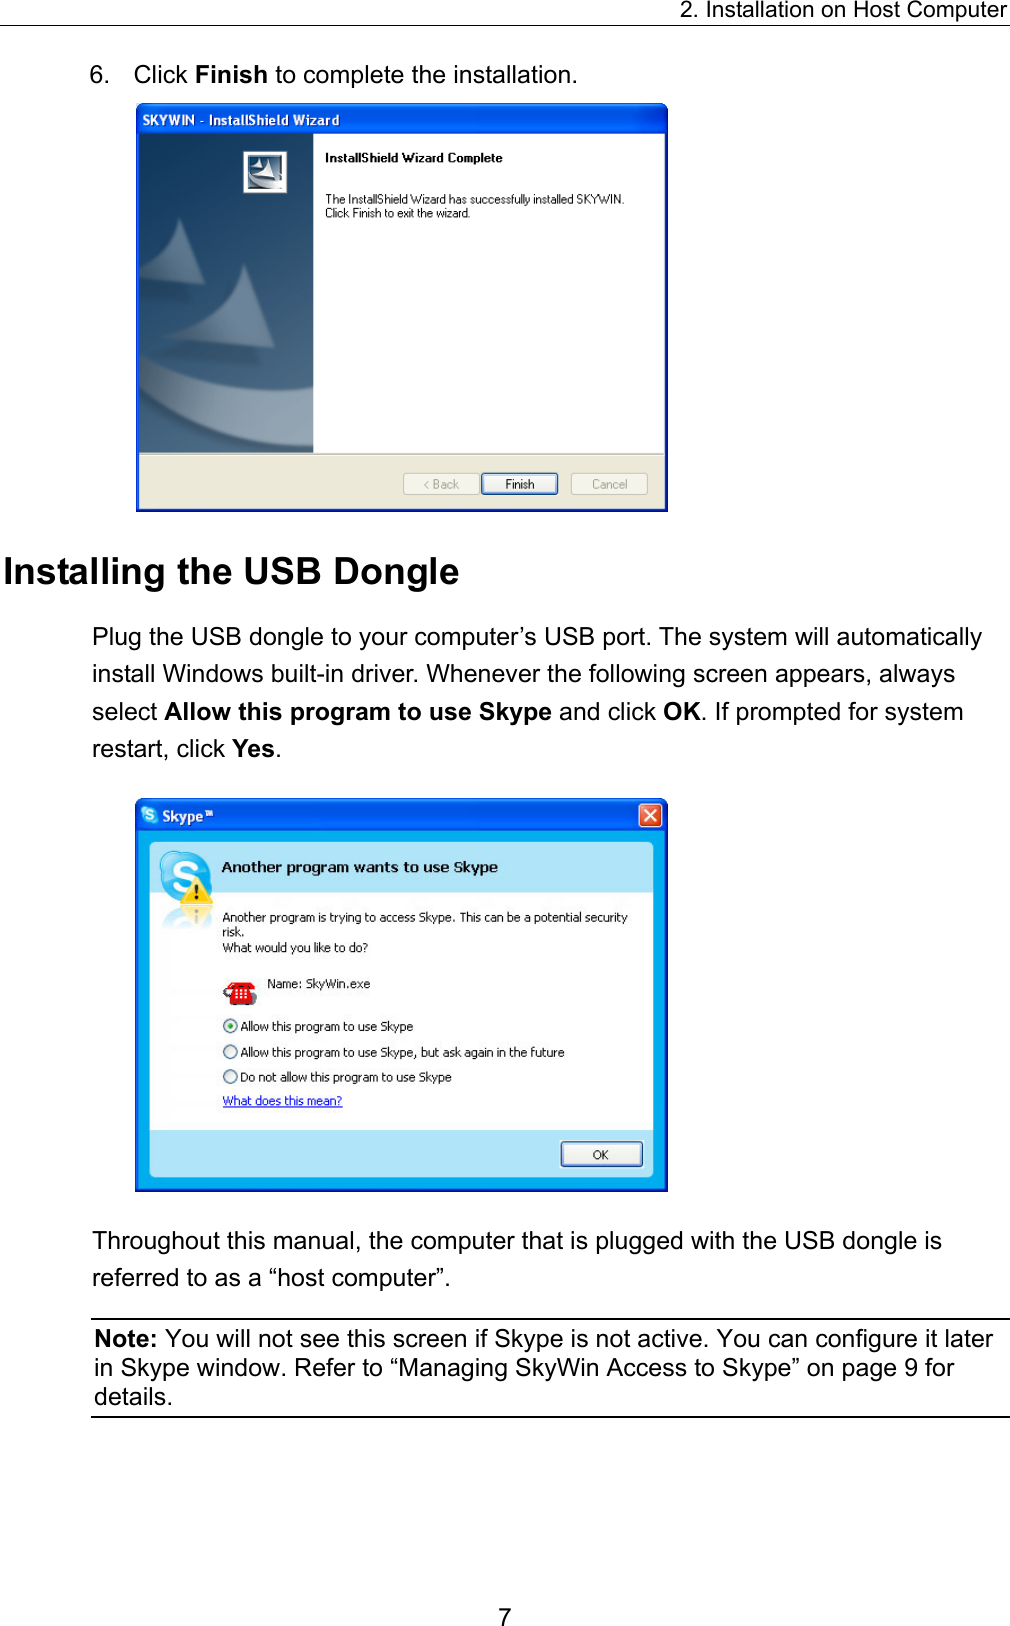 2. Installation on Host Computer 6. Click Finish to complete the installation.  Installing the USB Dongle Plug the USB dongle to your computer’s USB port. The system will automatically install Windows built-in driver. Whenever the following screen appears, always select Allow this program to use Skype and click OK. If prompted for system restart, click Yes.   Throughout this manual, the computer that is plugged with the USB dongle is referred to as a “host computer”.   Note: You will not see this screen if Skype is not active. You can configure it later in Skype window. Refer to “Managing SkyWin Access to Skype” on page 9 for details. 7 